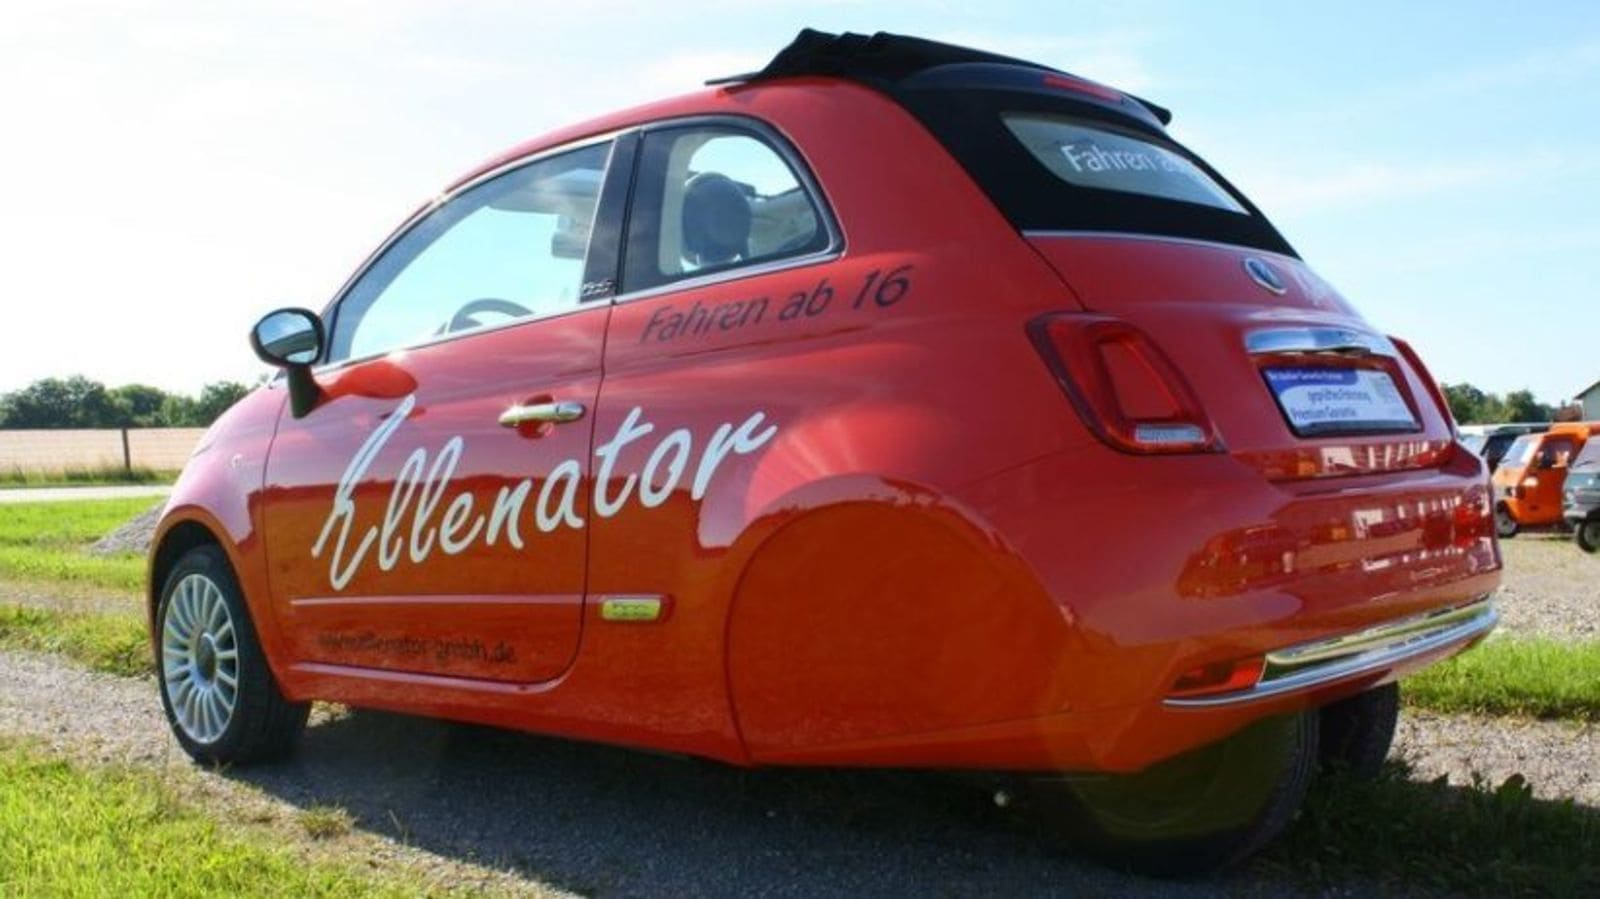 This custom Fiat 500 is a 'three-wheeler' with four wheels